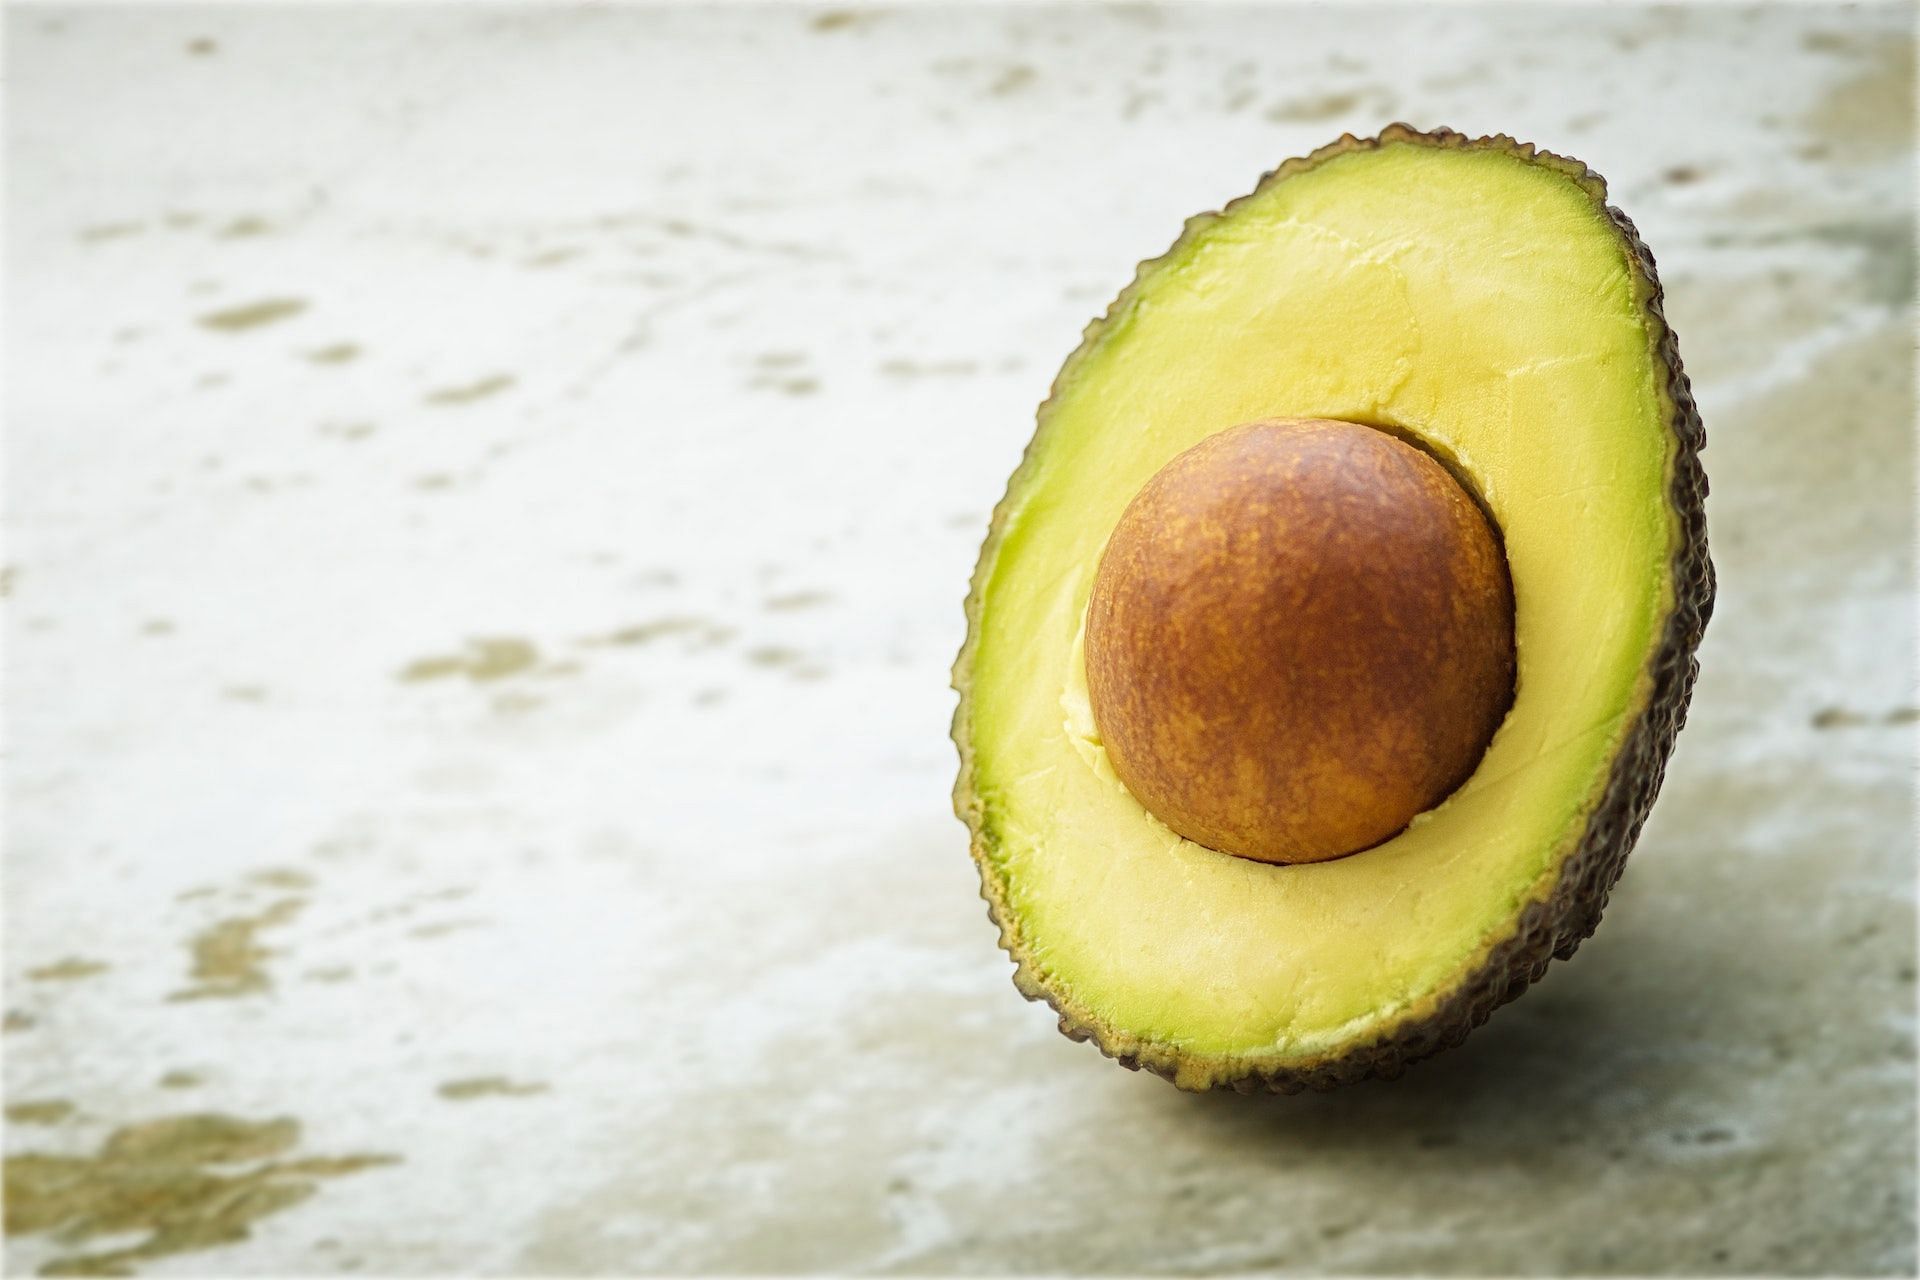 Avocados are the healthiest foods on earth. (Photo via Pexels/mali maeder)